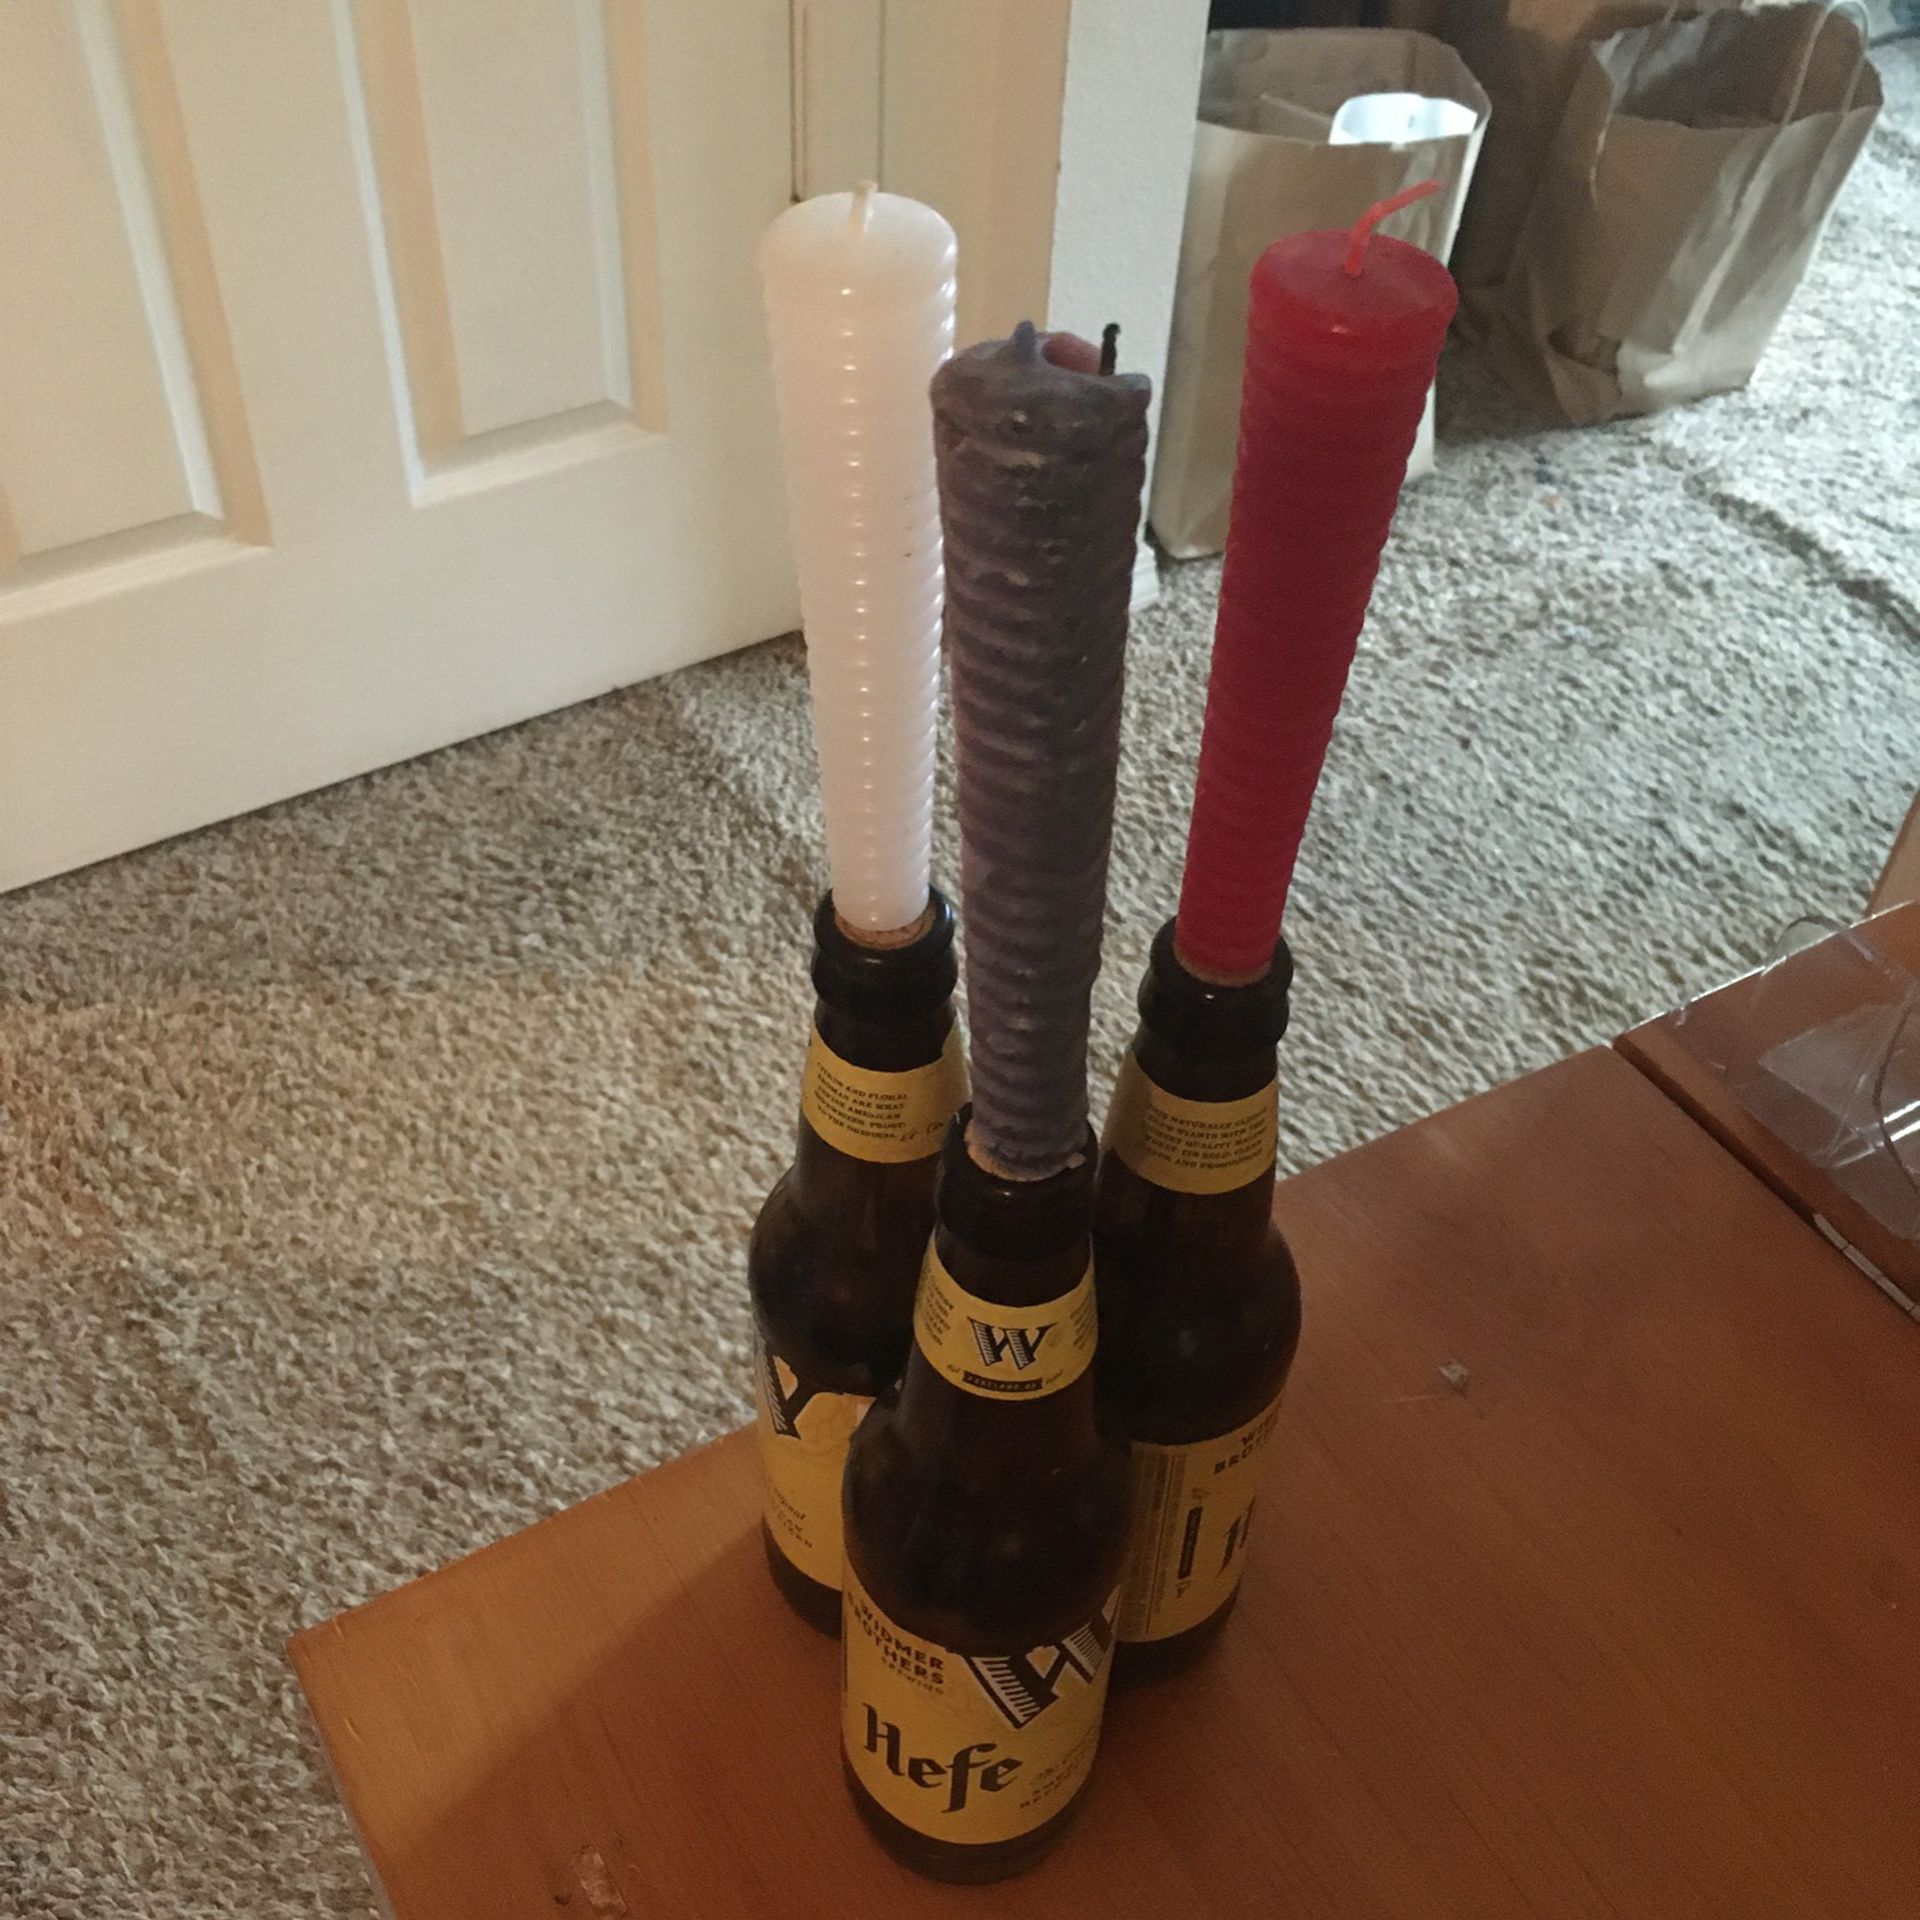 Reusable Beer Bottle Candle Holders With Red, White, Blue Candles